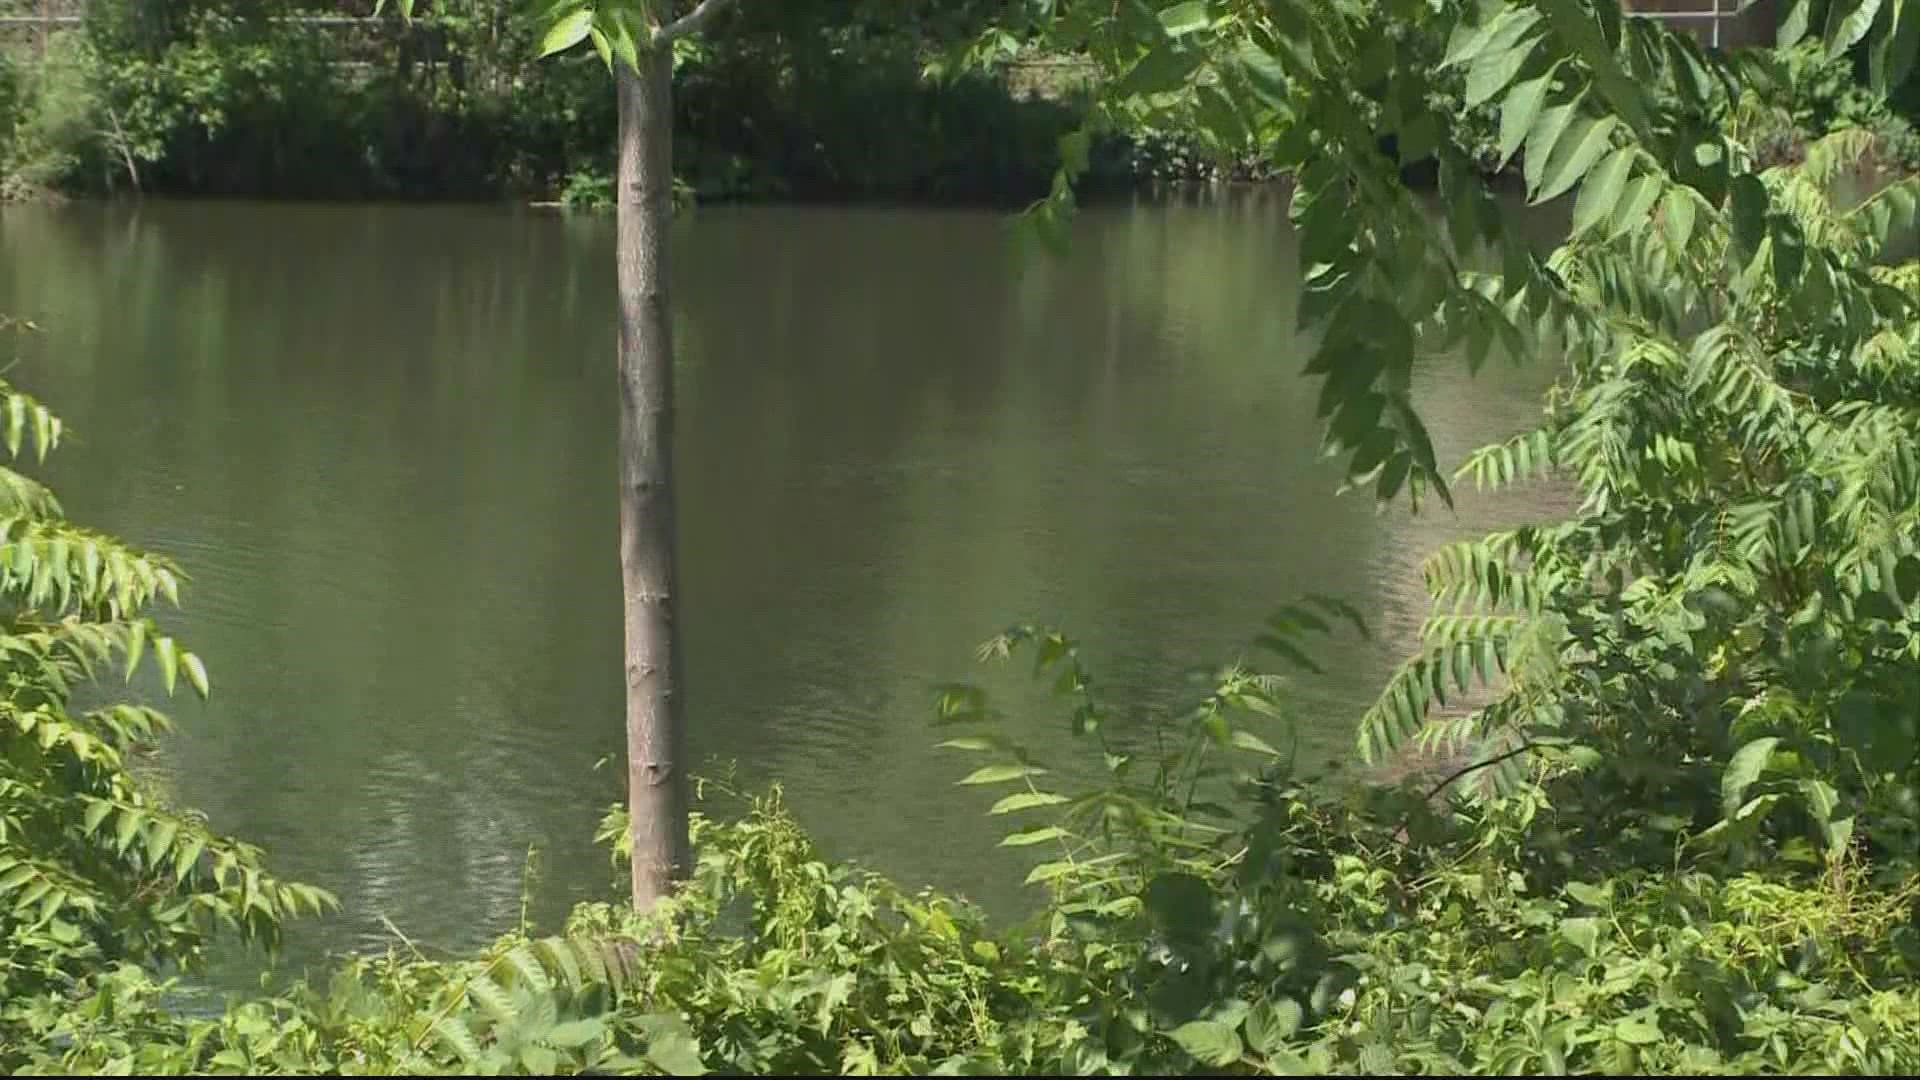 Rescue crews say a man died while swimming in the waterway of Four Mile Run in Alexandria Monday afternoon.